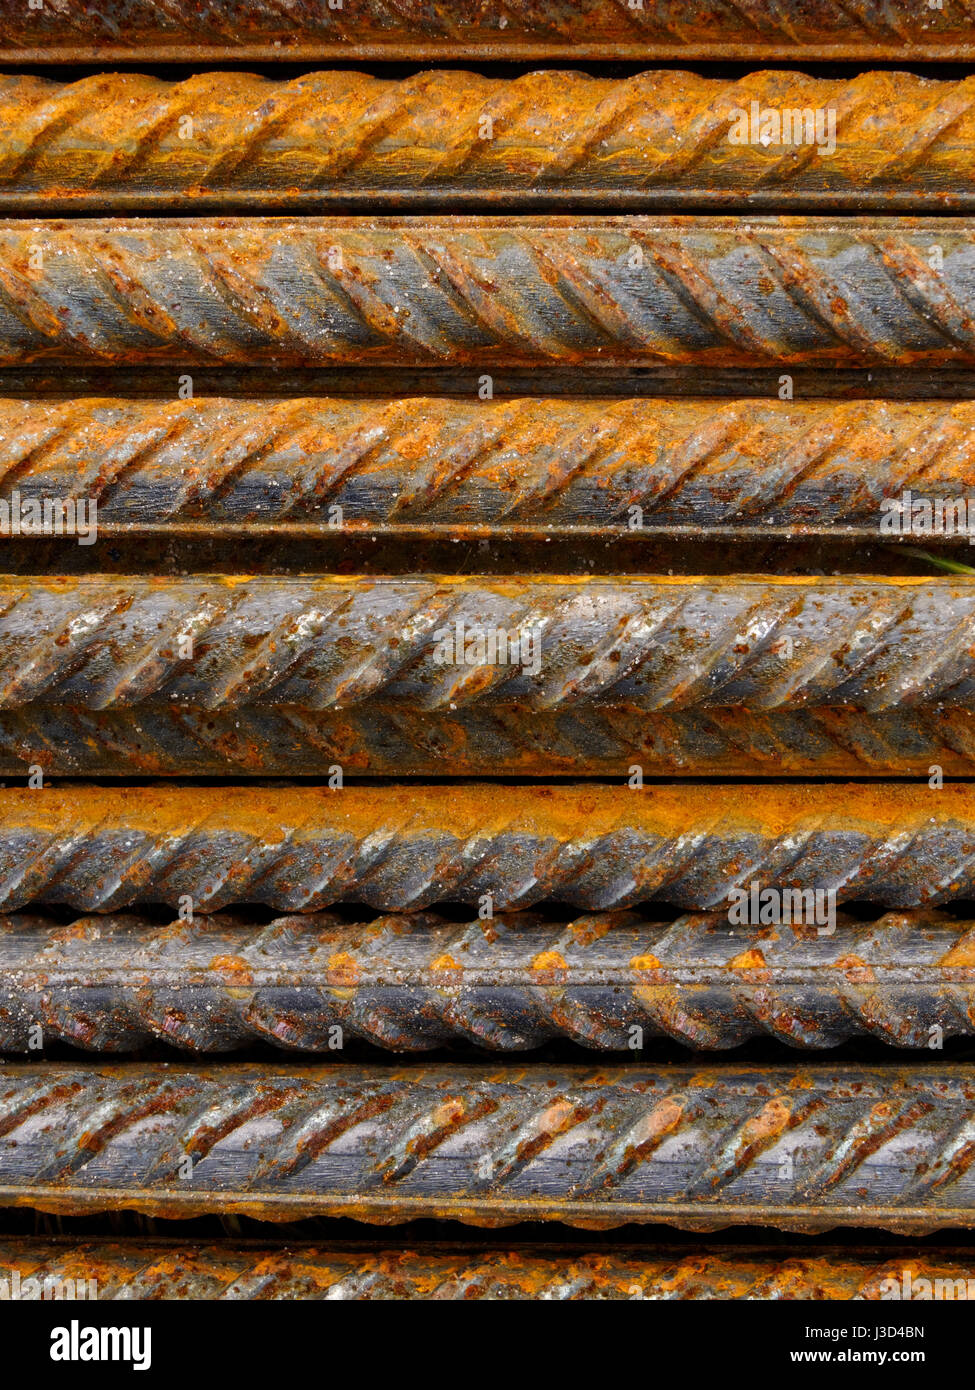 Backgrounds and textures: bunch of reinforcement steel bars, textured and rusty, industrial abstract Stock Photo